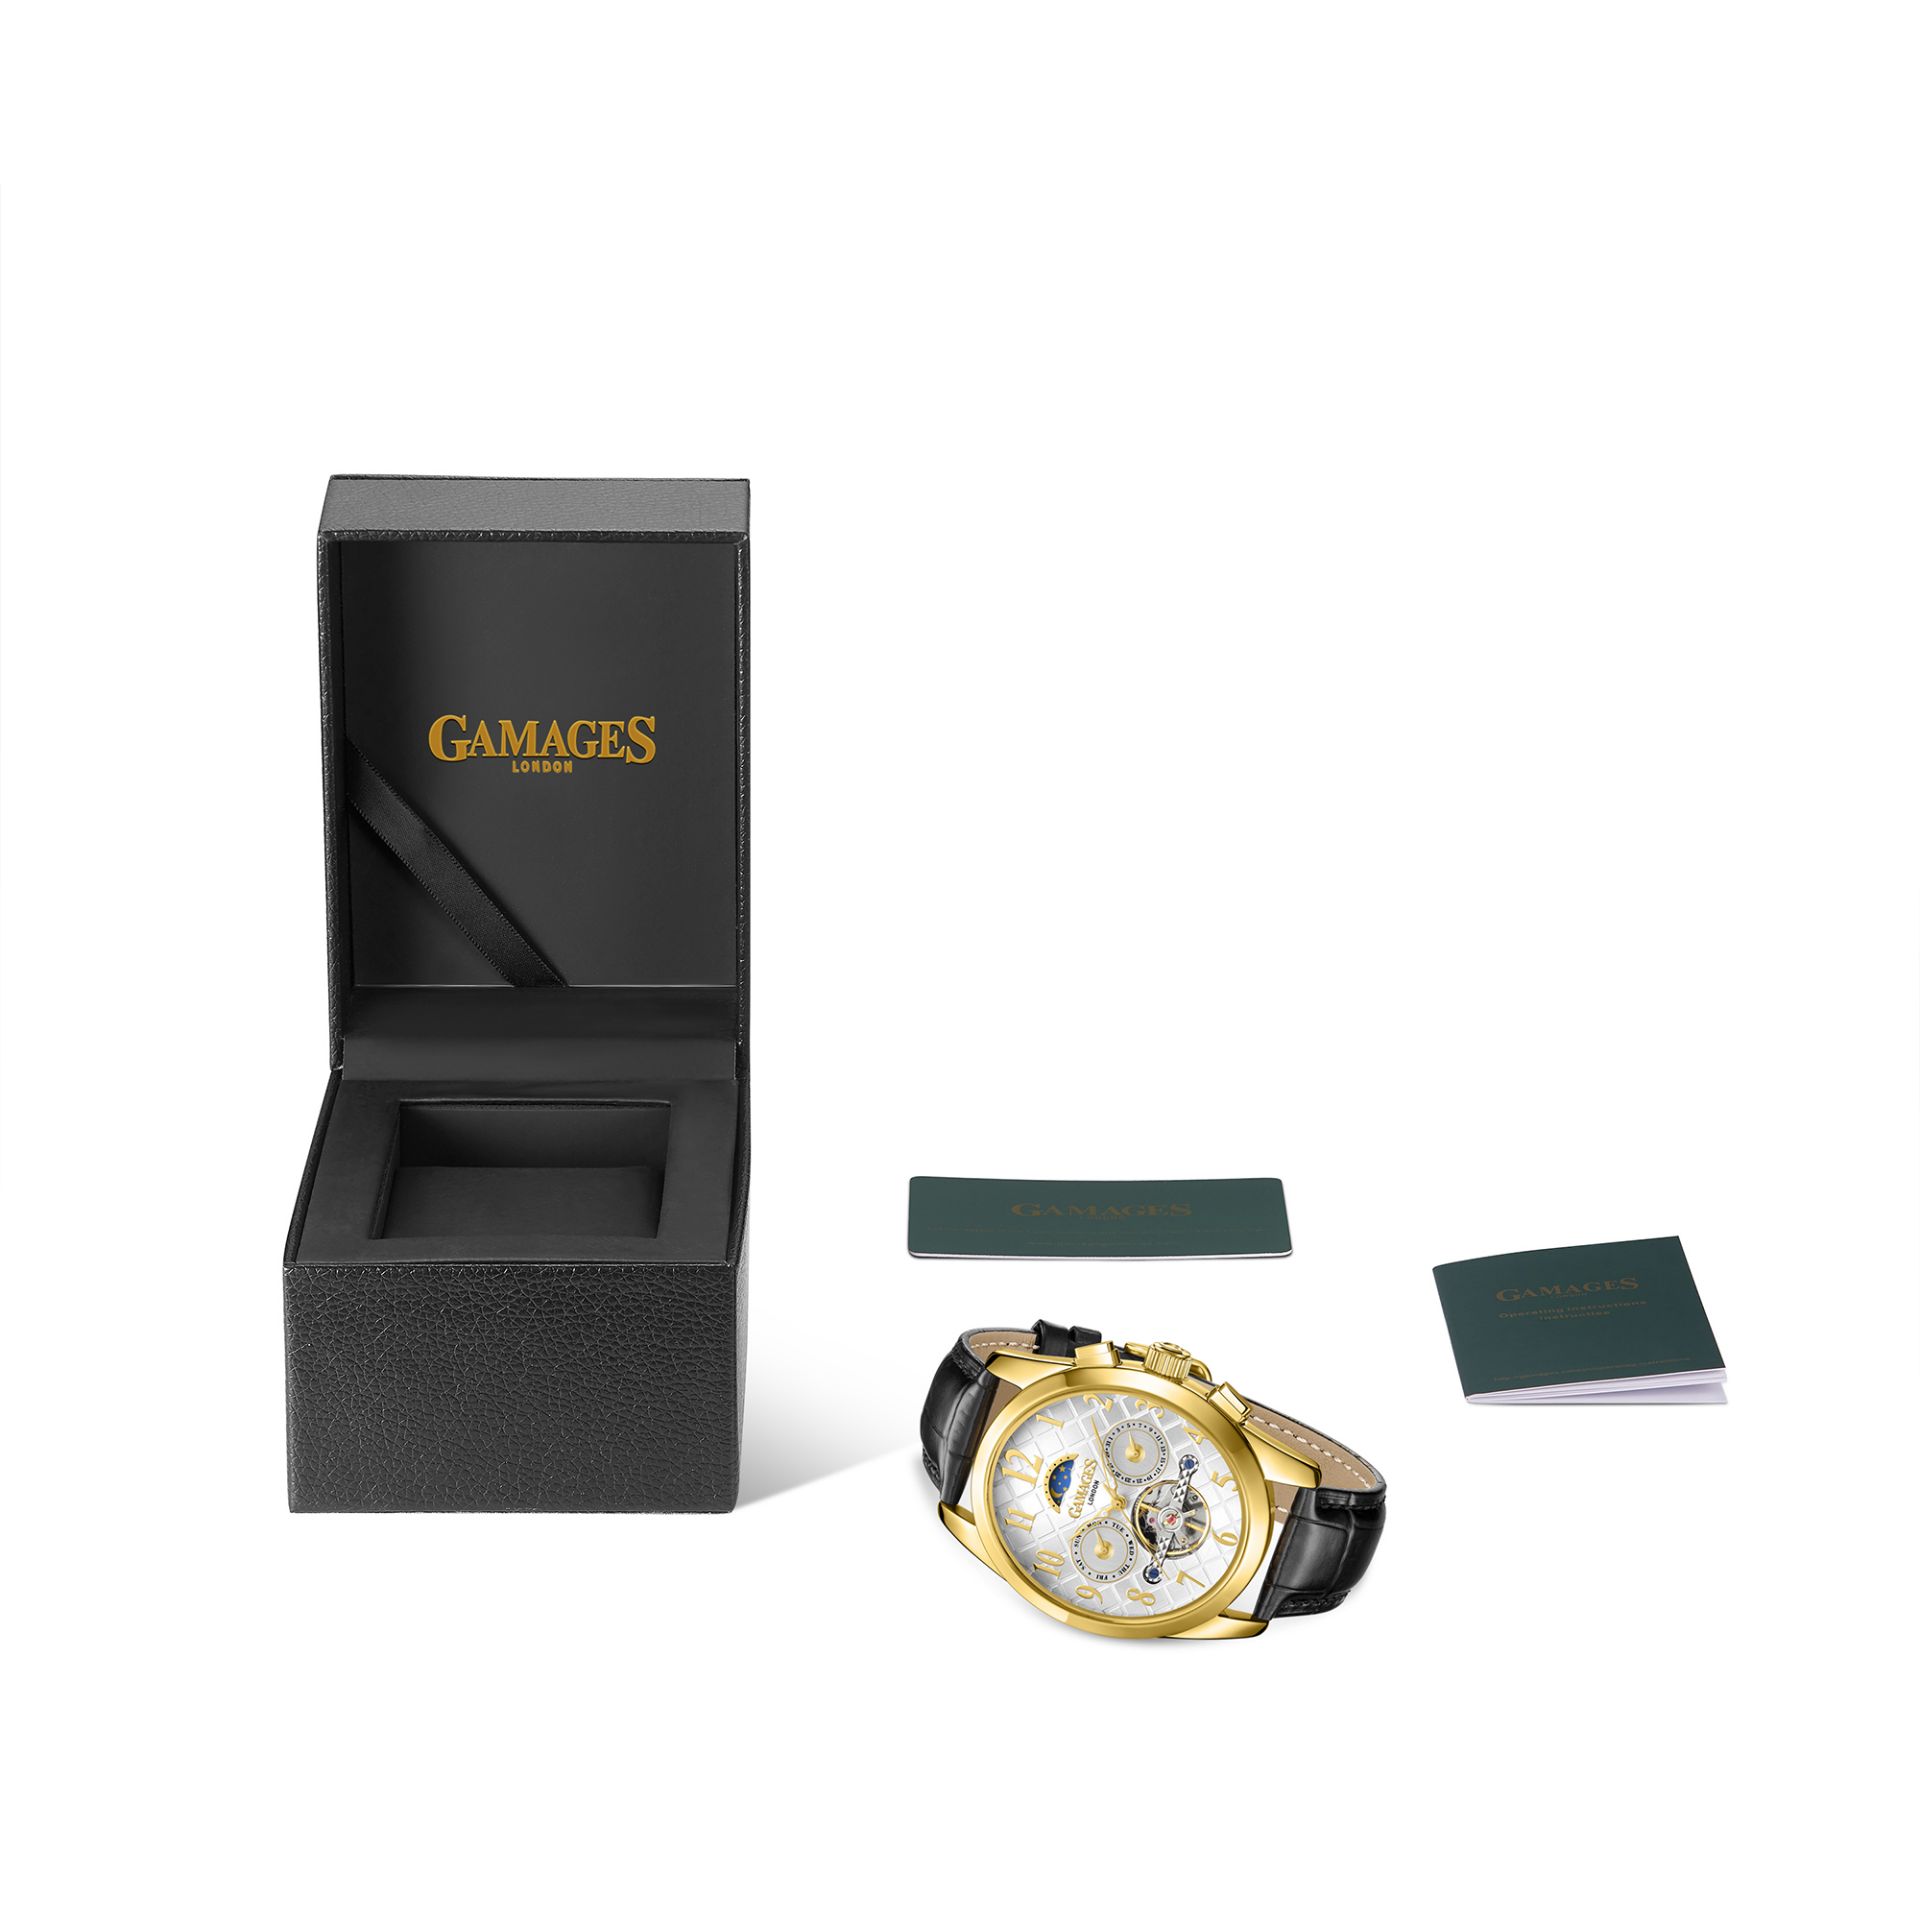 Gamages of London Hand Assembled Muse Automatic Gold White - 5 Year Warranty & Free Delivery